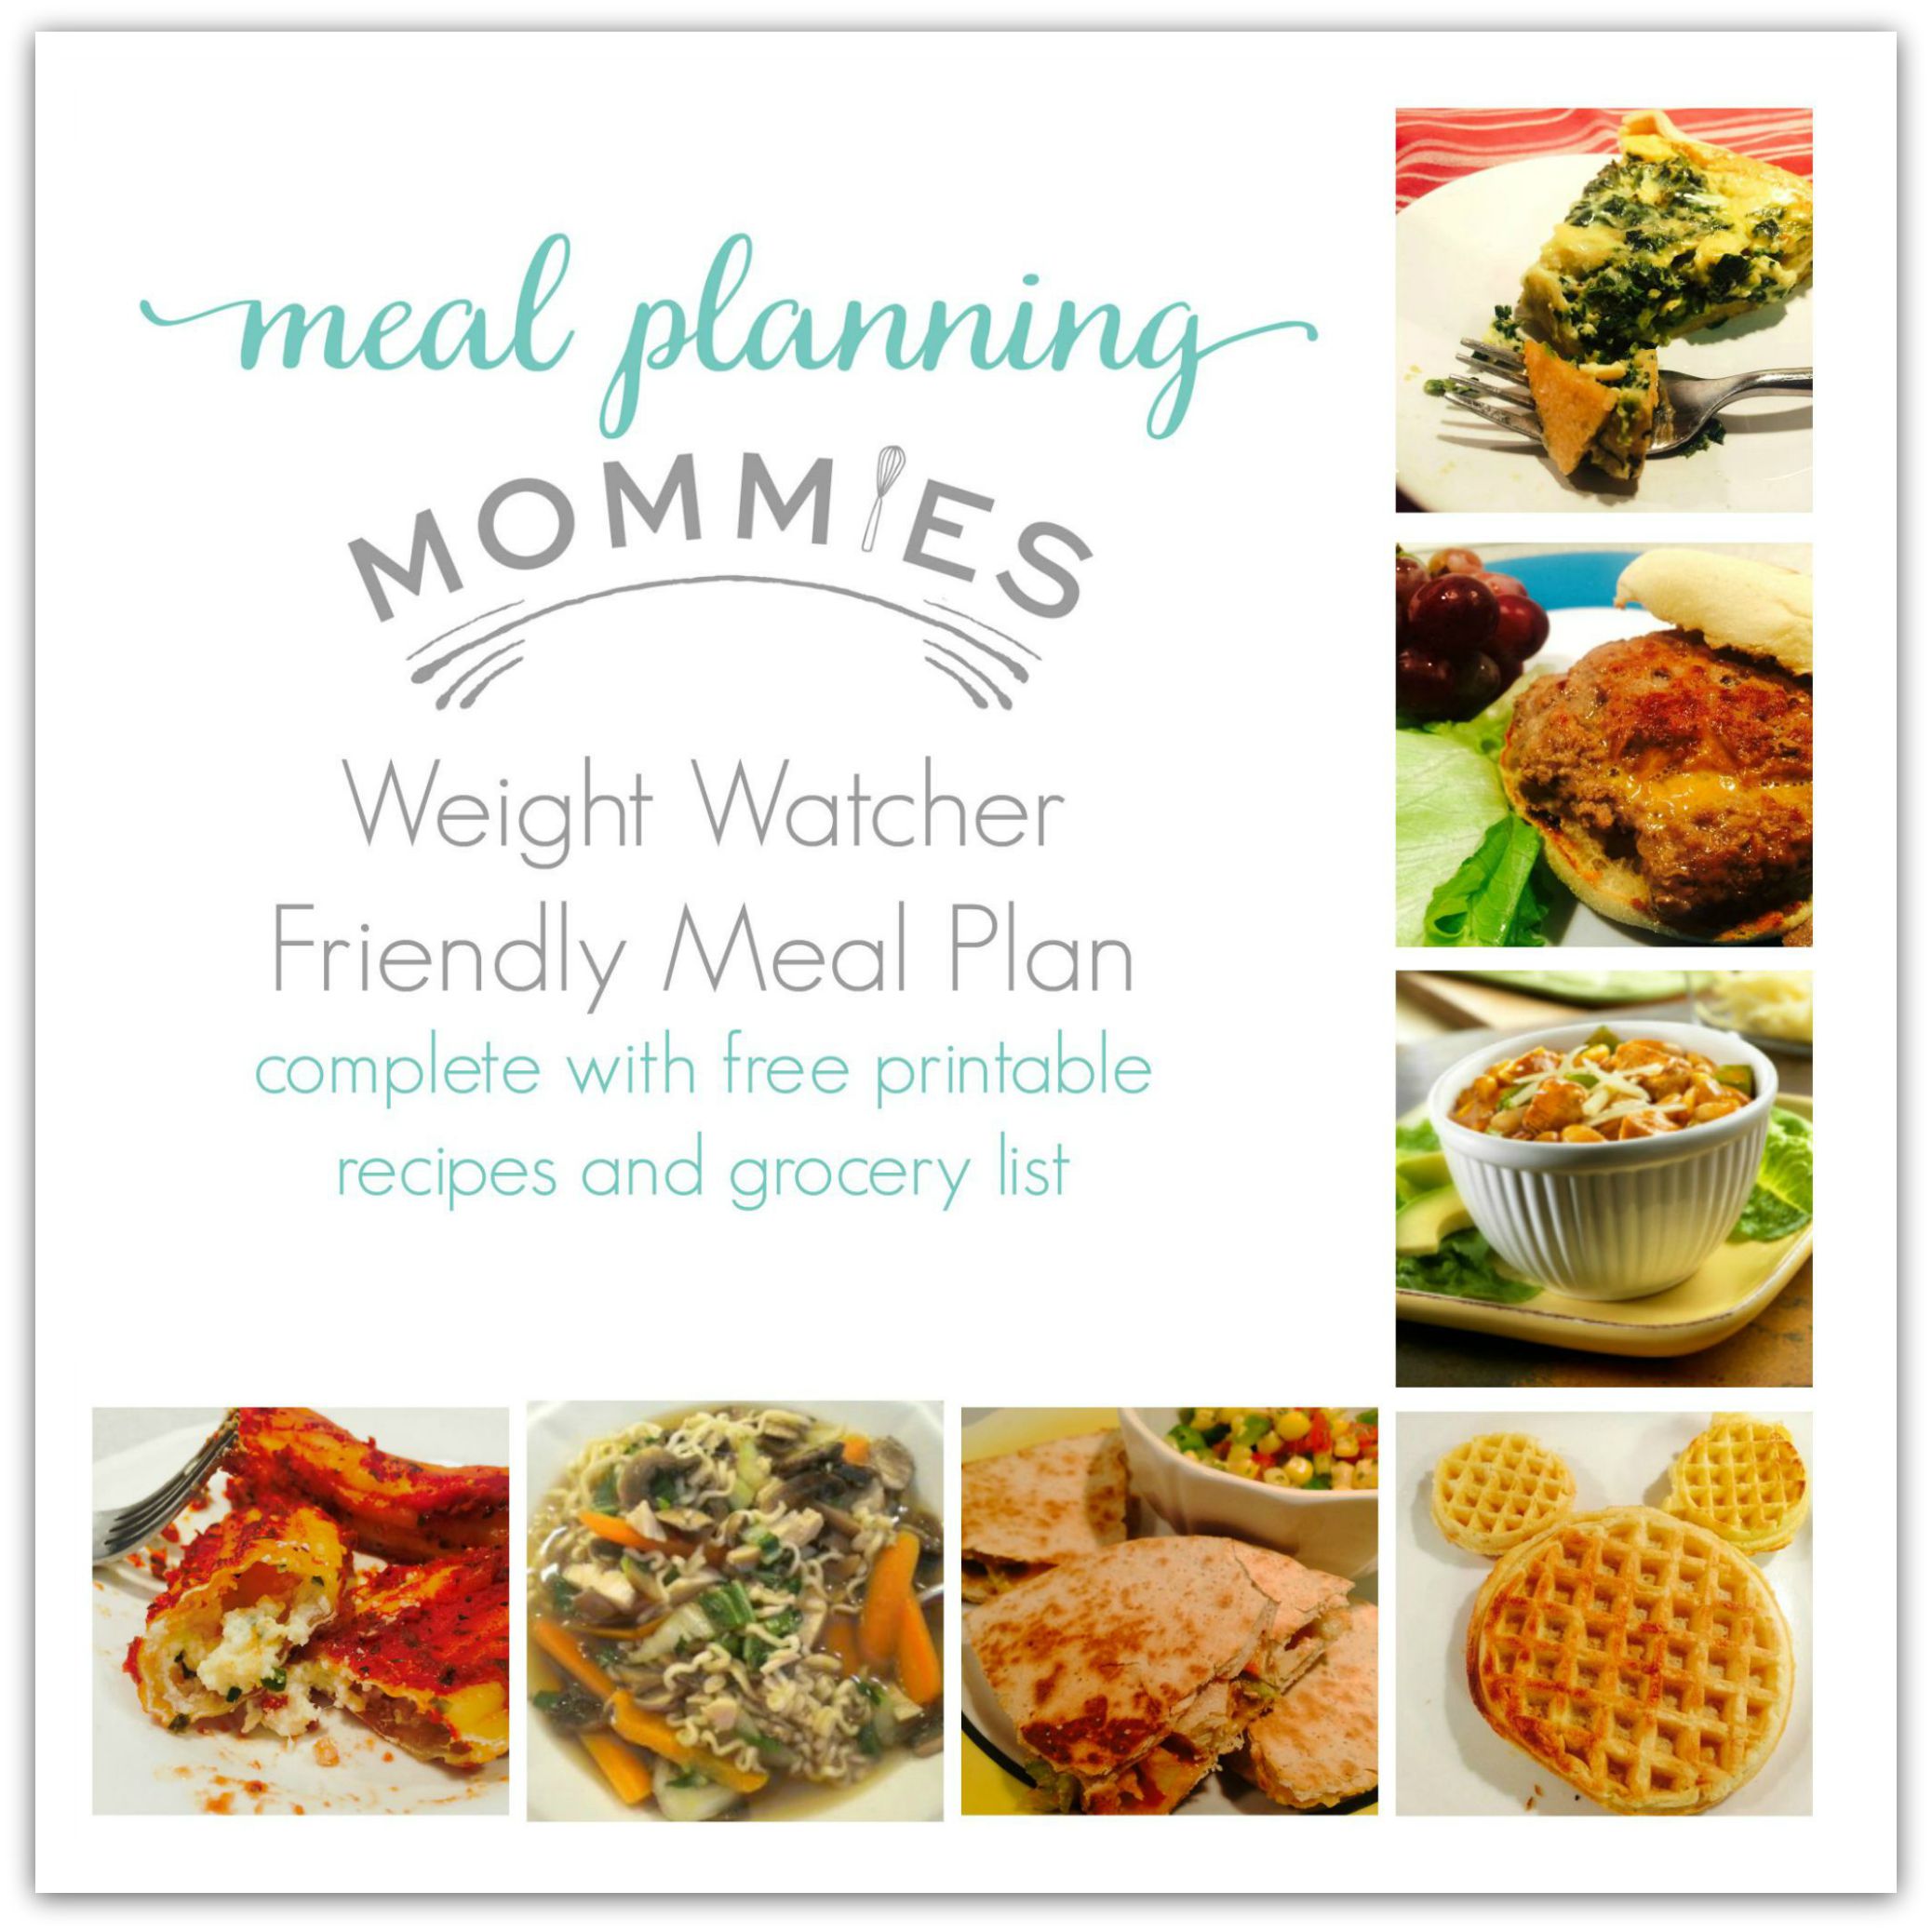 august 31 meal plan pic